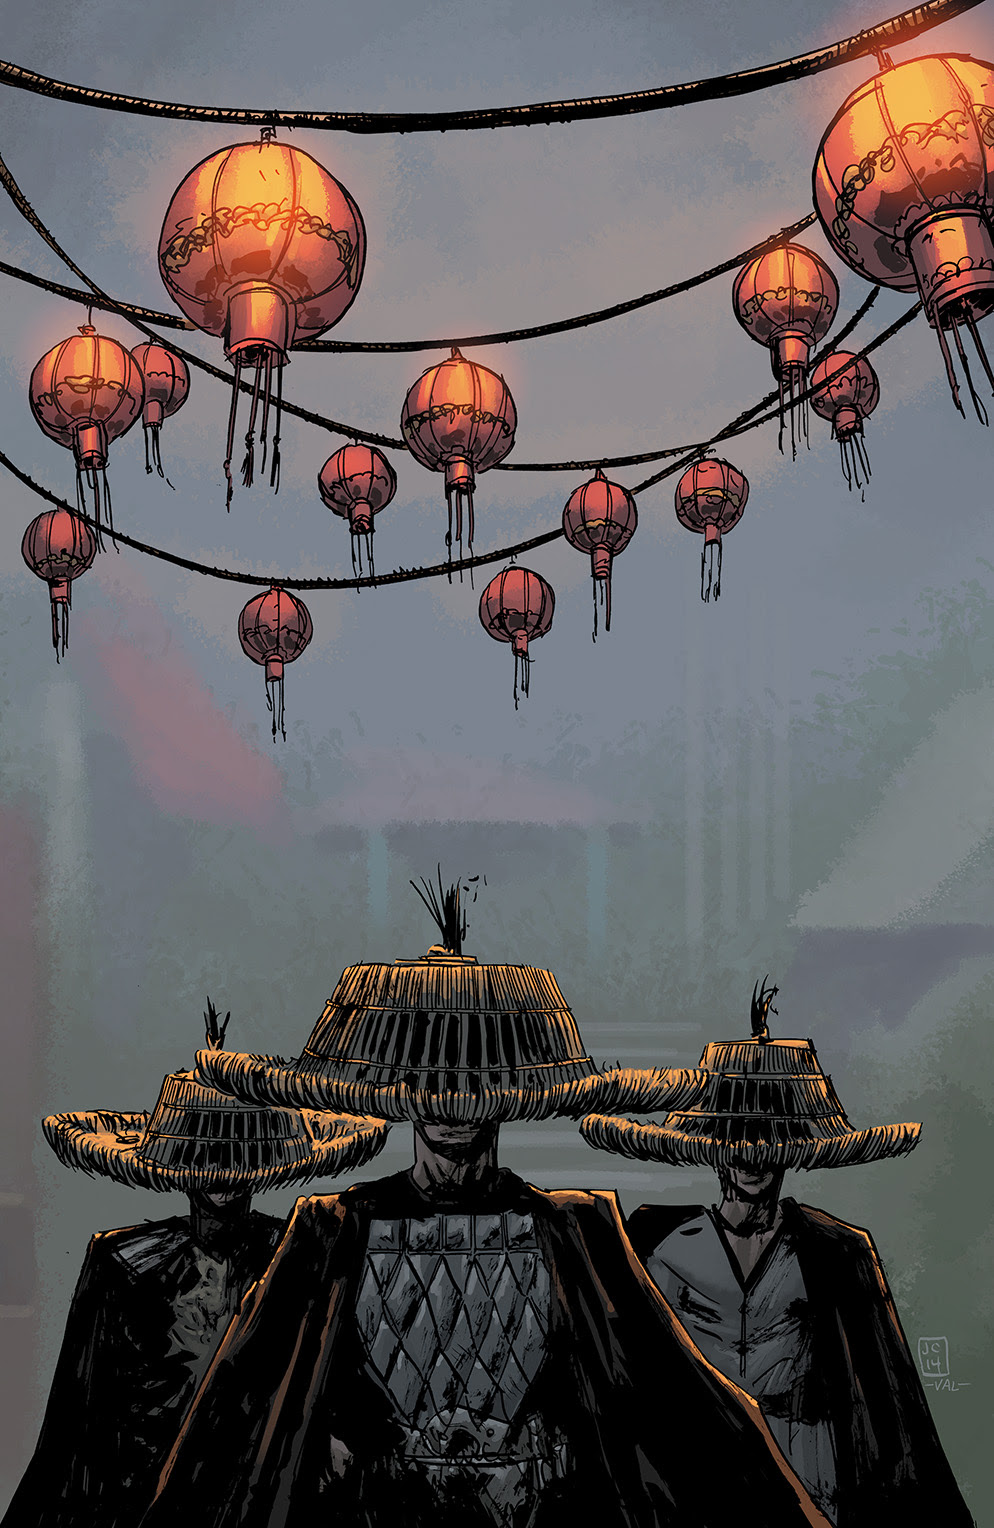 BIG TROUBLE IN LITTLE CHINA #7 Cover C by Jason Copland